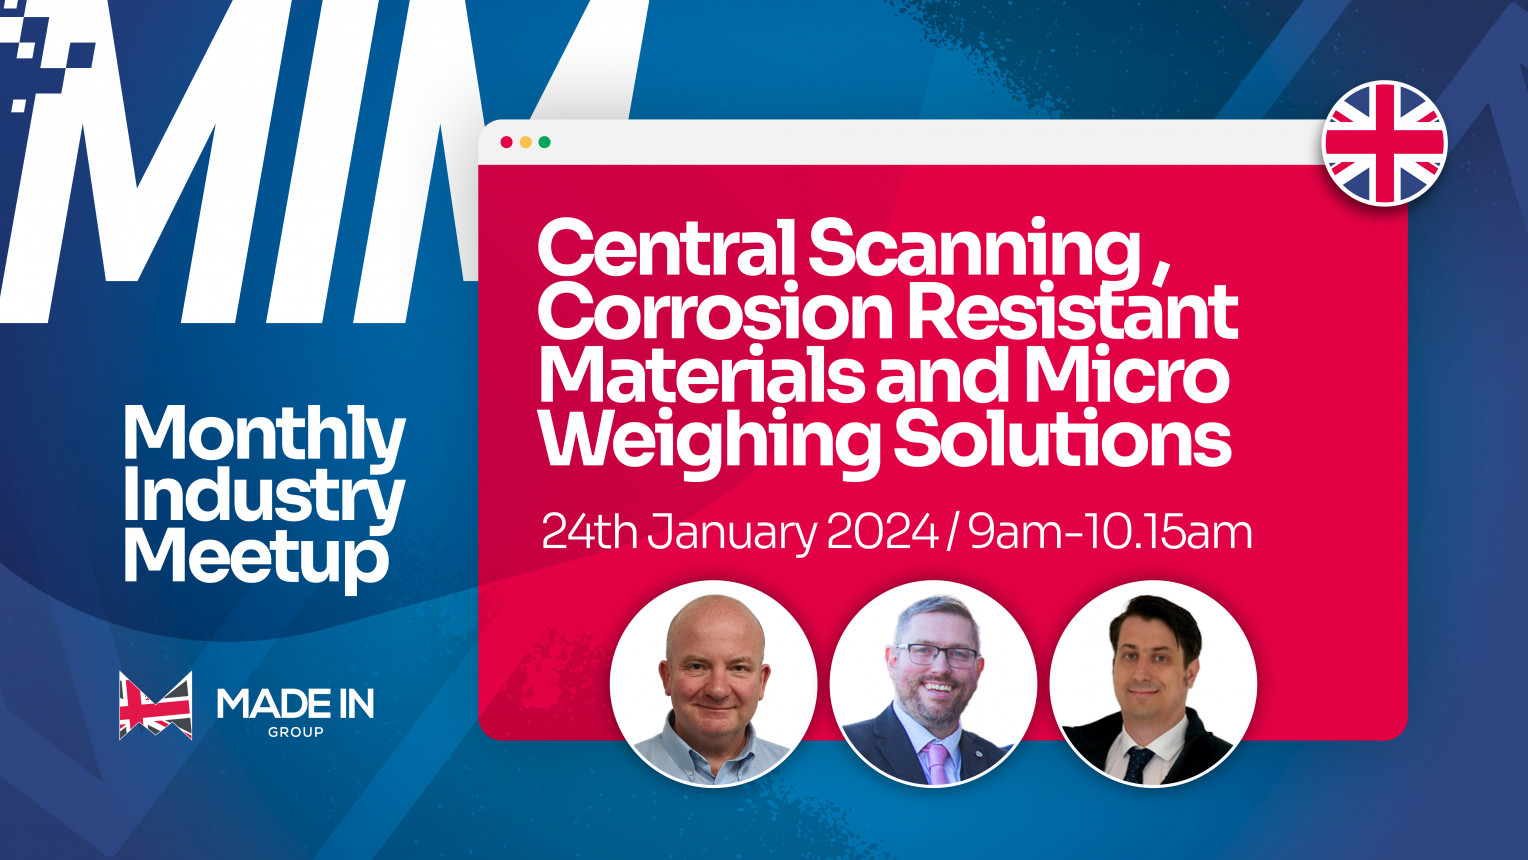 Monthly Industry Meet-Up with Central Scanning, Corrosion Resistant Materials and Micro Weighing Solutions